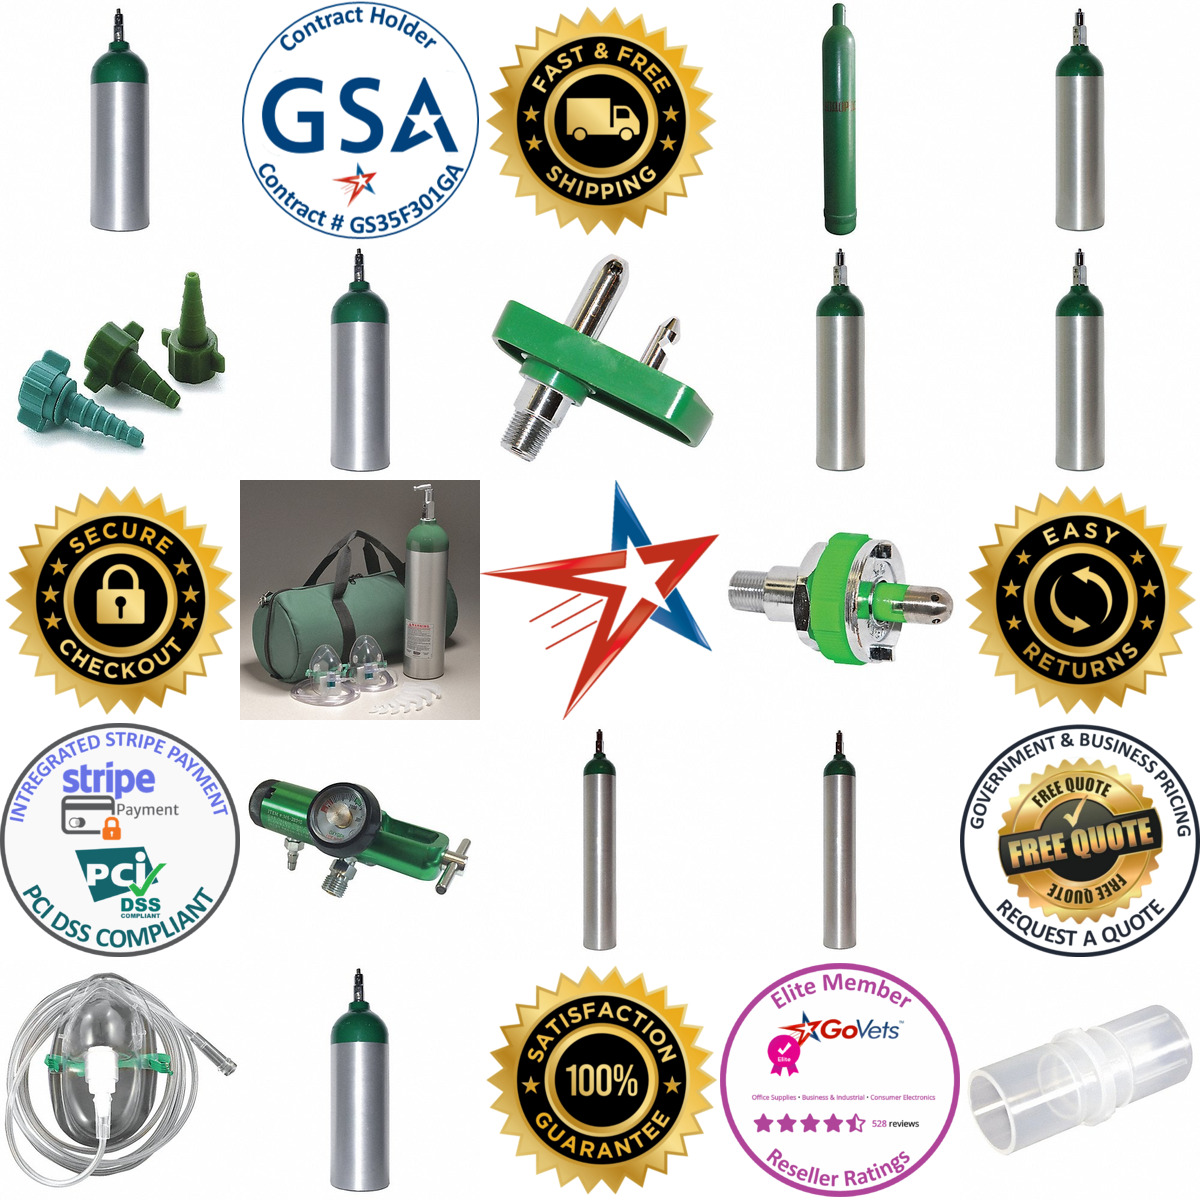 A selection of Emergency Oxygen Accessories products on GoVets